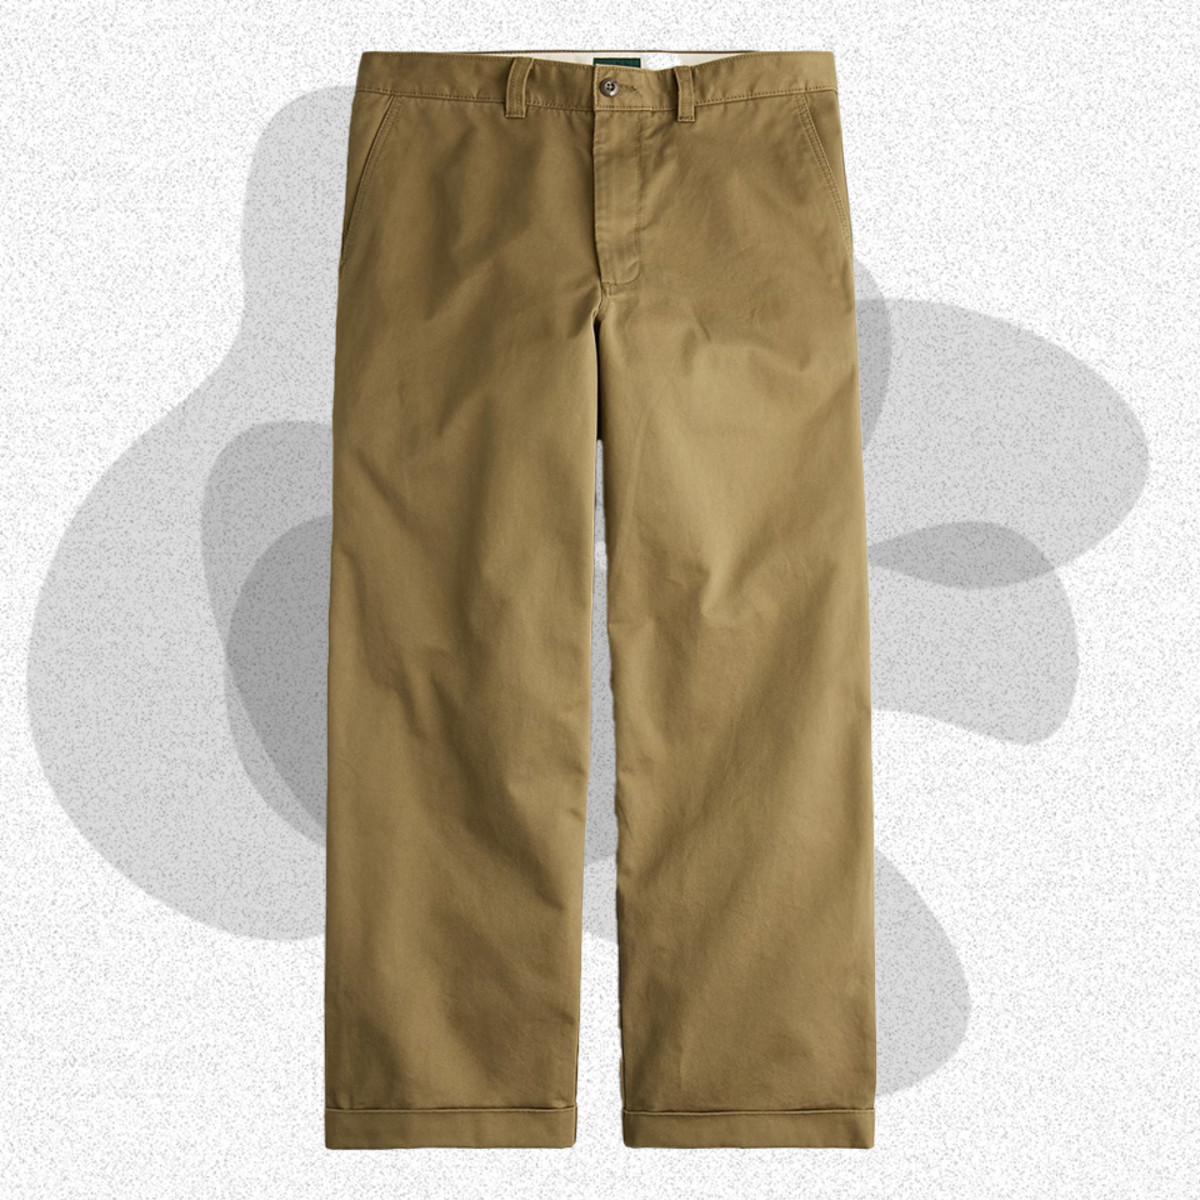 Tuck your button-down into a pair of green cargo pants., 64 Casual Outfits  You Can Wear Every Day of the Week